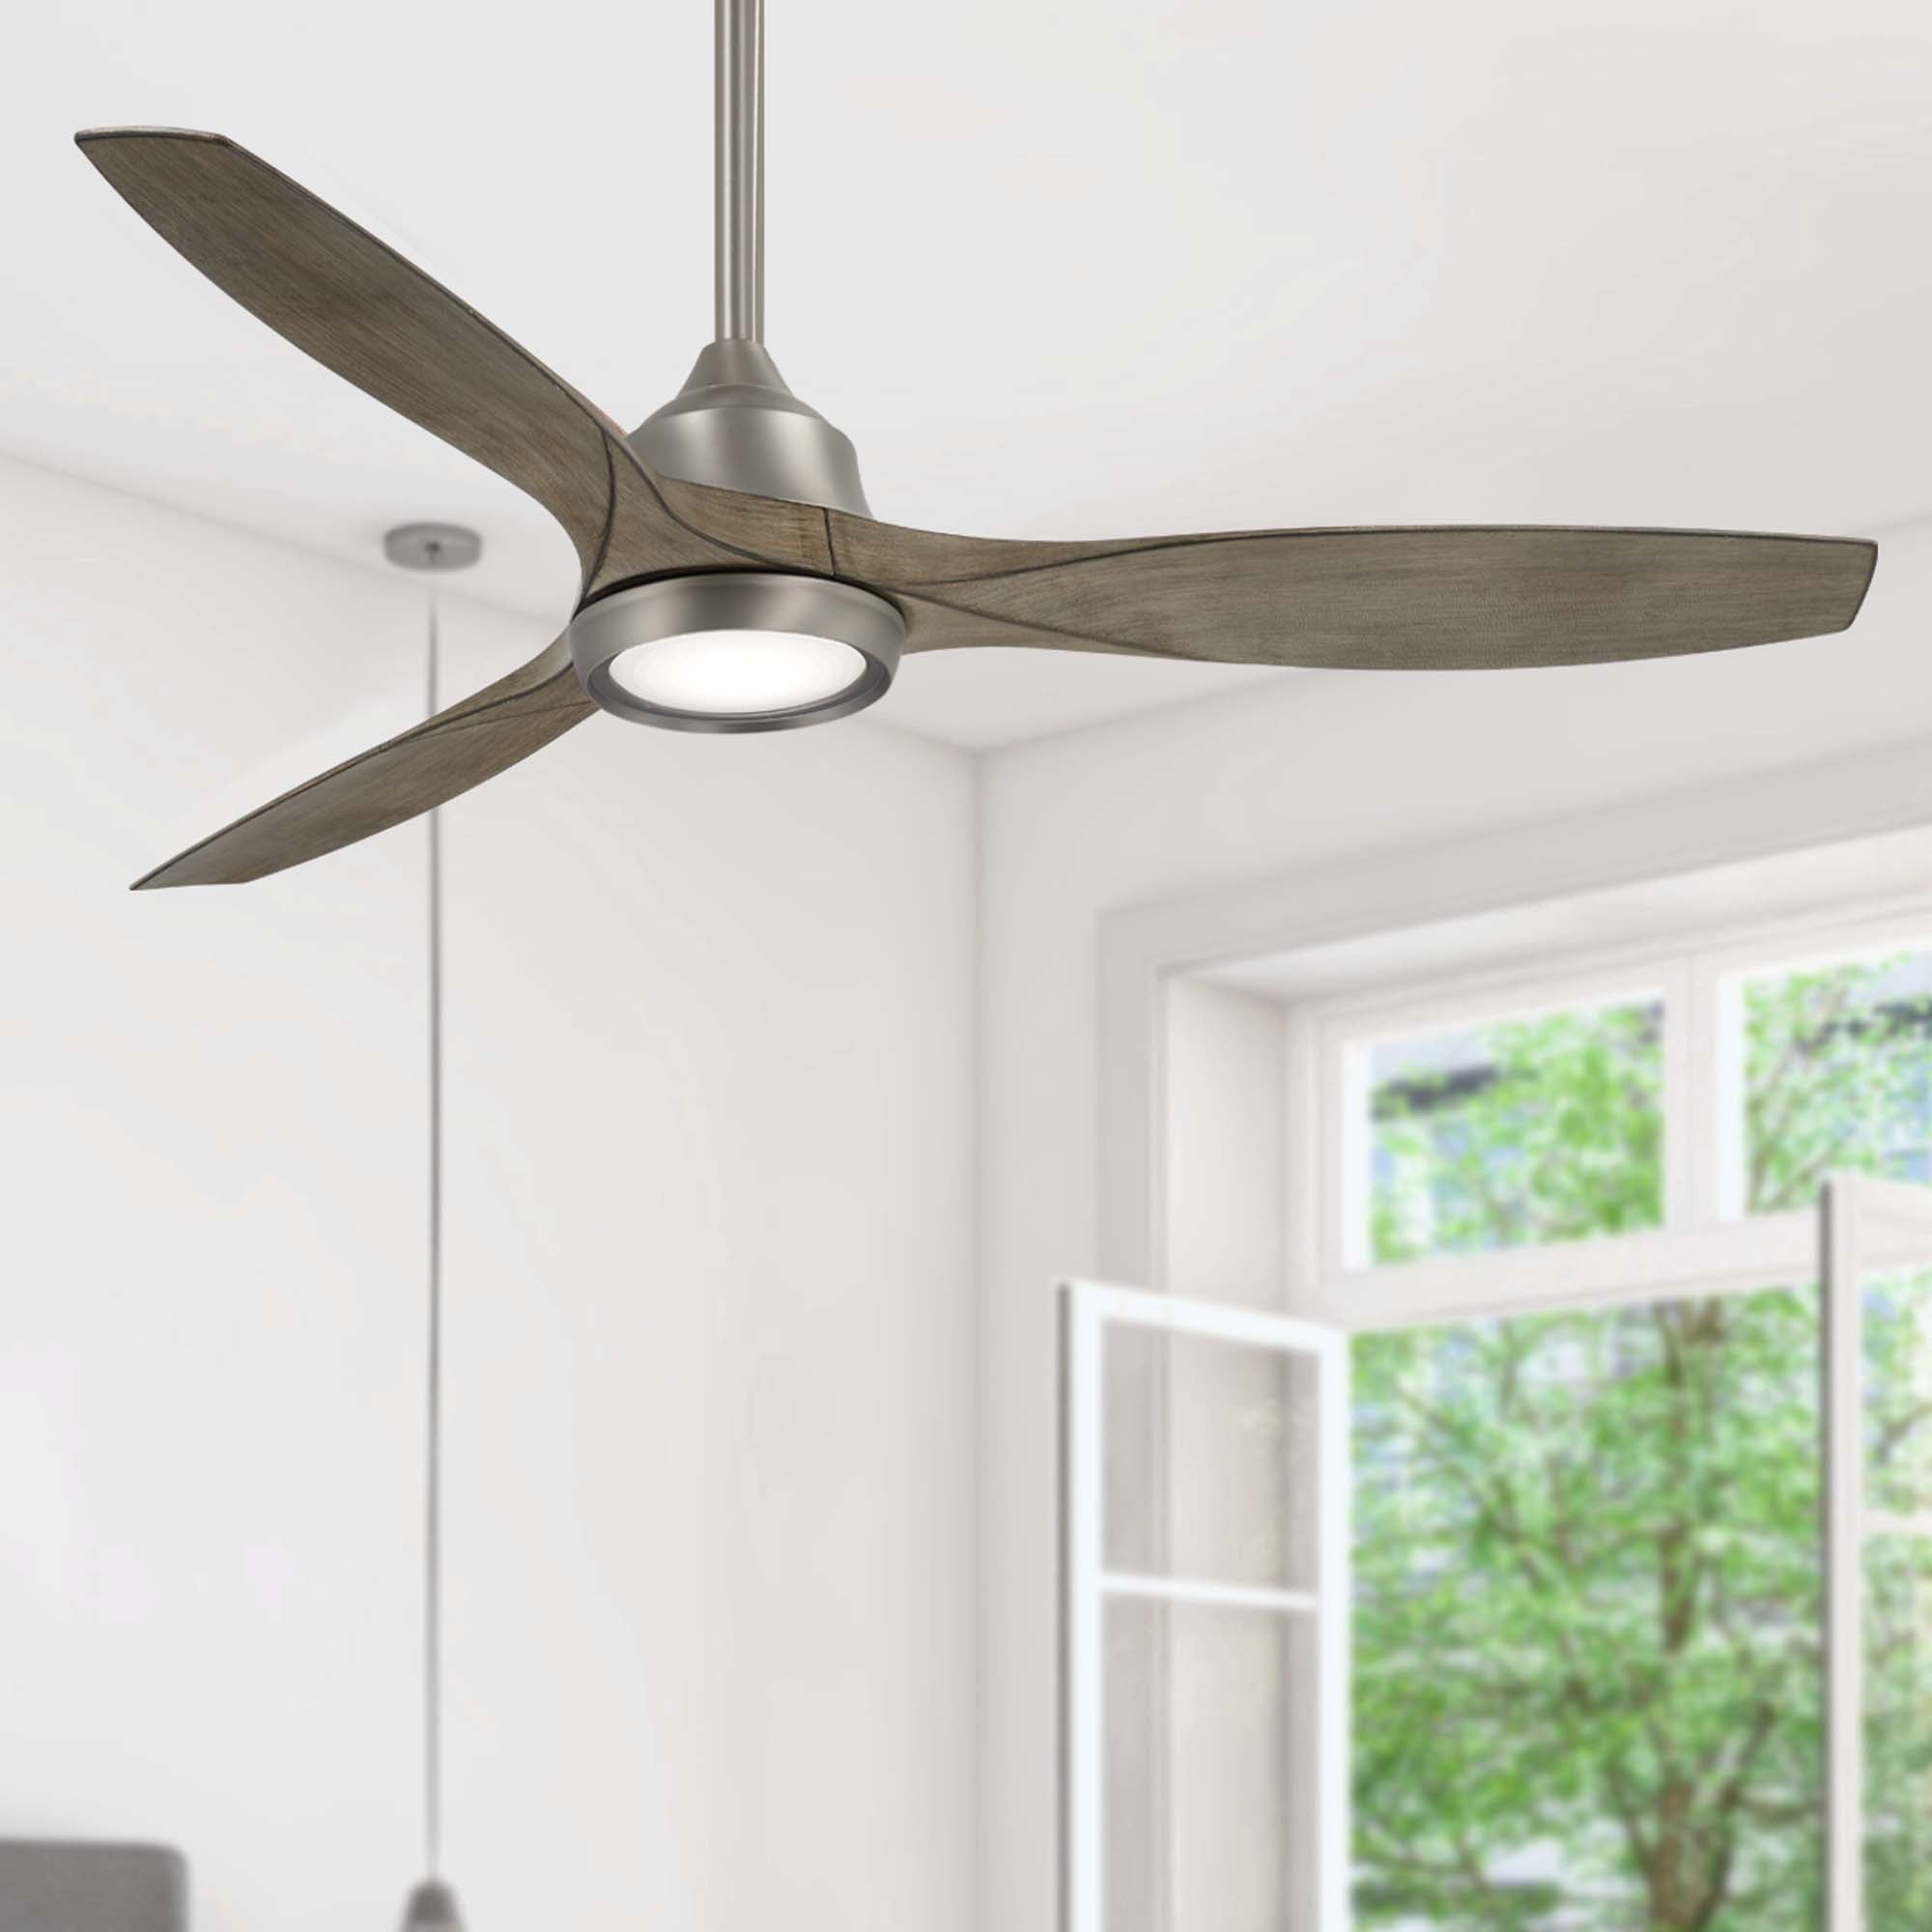 Minka Aire Skyhawk 60" Ceiling Fan with LED Light Kit F749L Ceiling Fan Minka-Aire Burnished Nickel Finish with Hand Carved Wood Driftwood Blades  